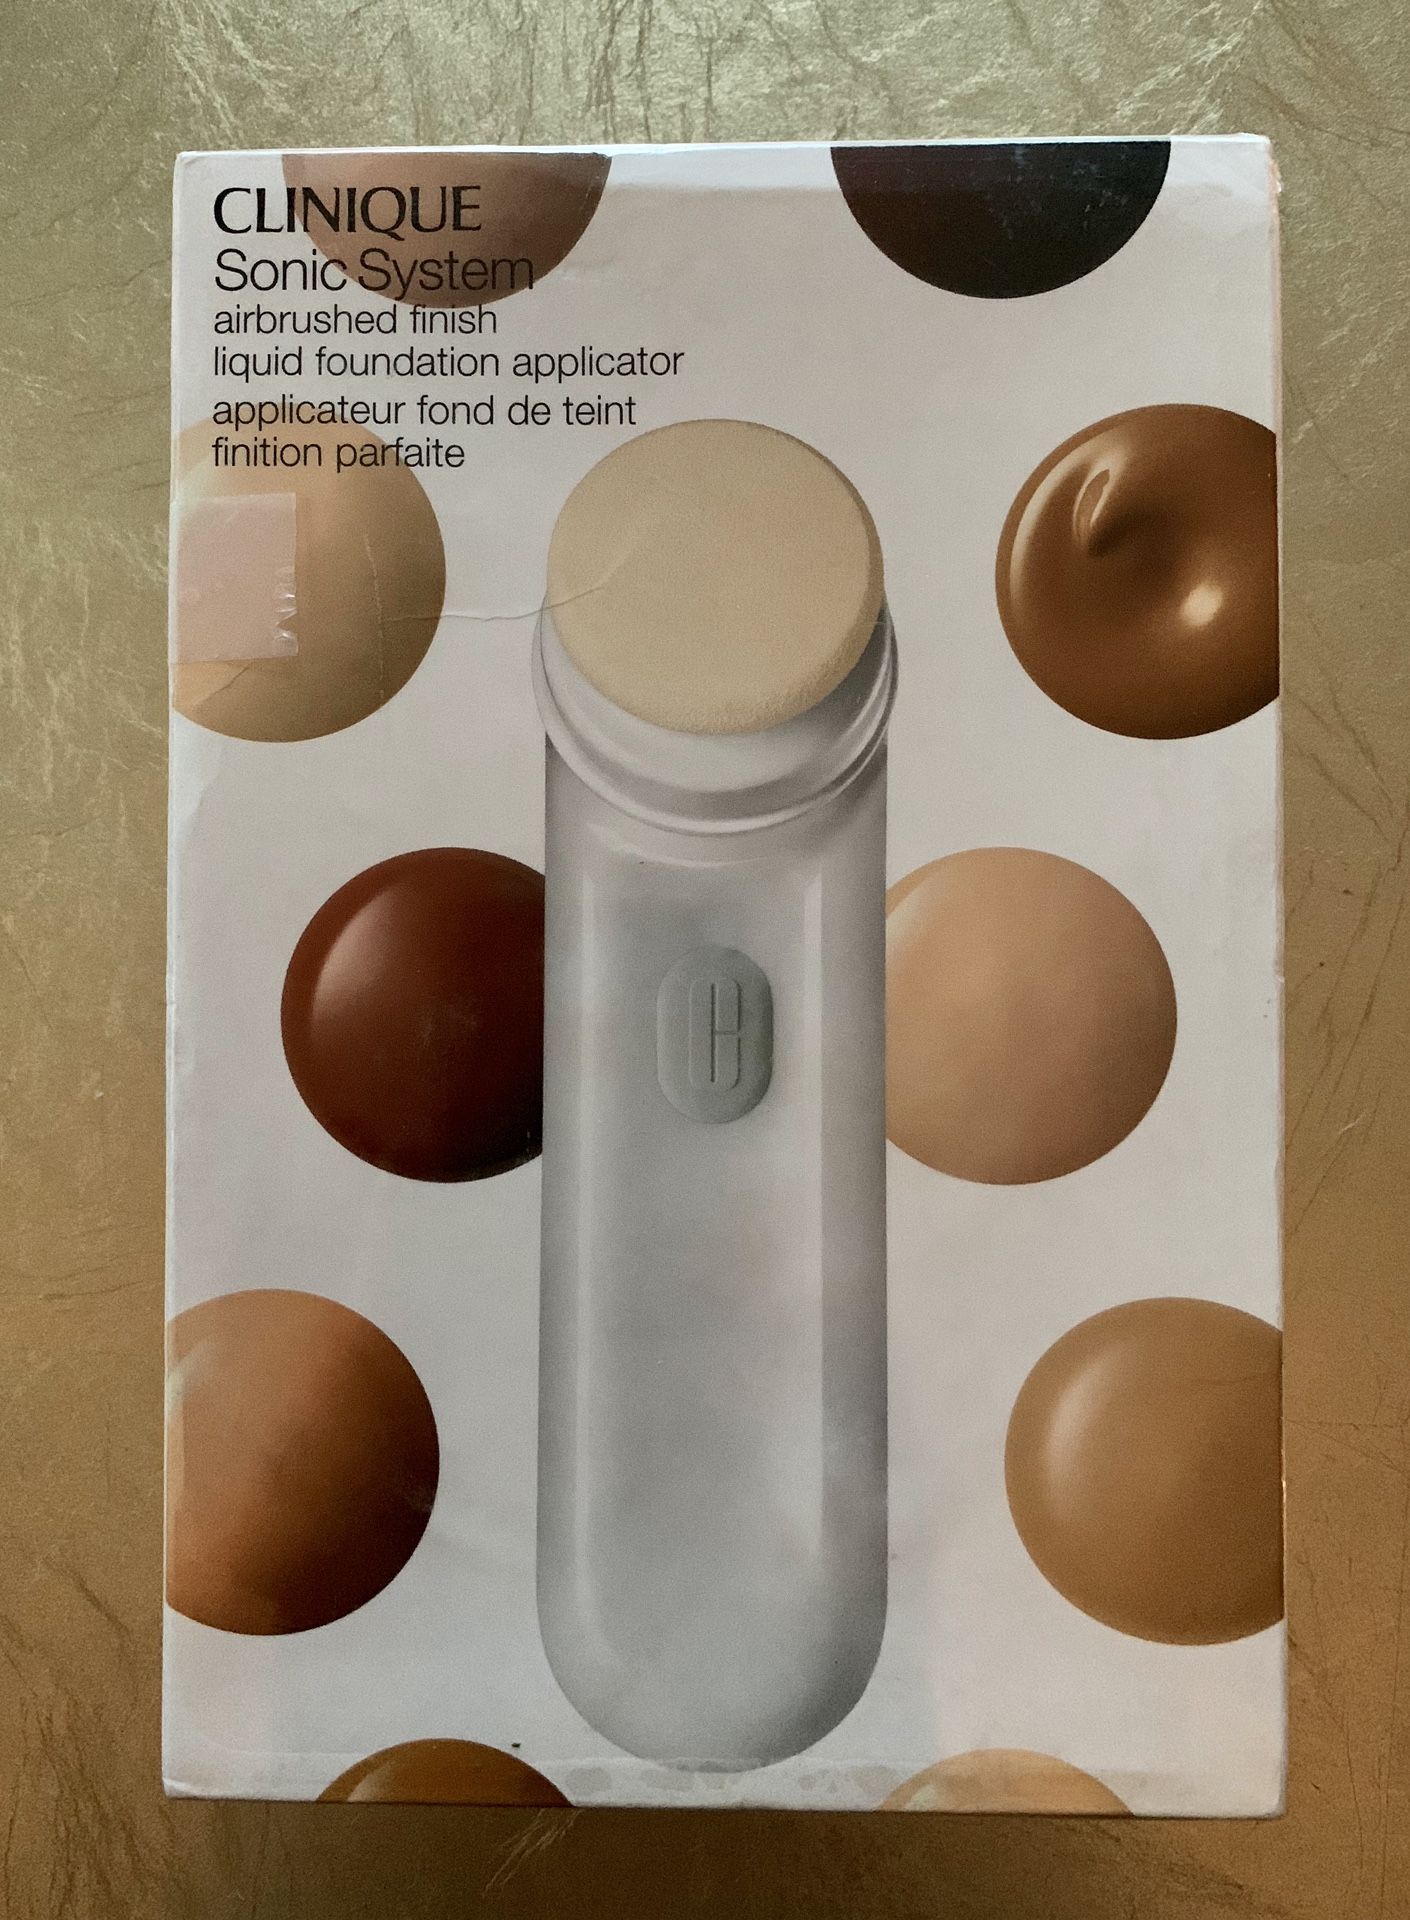 New, perfect gift for a woman ! Clinique sonic system makeup brush!